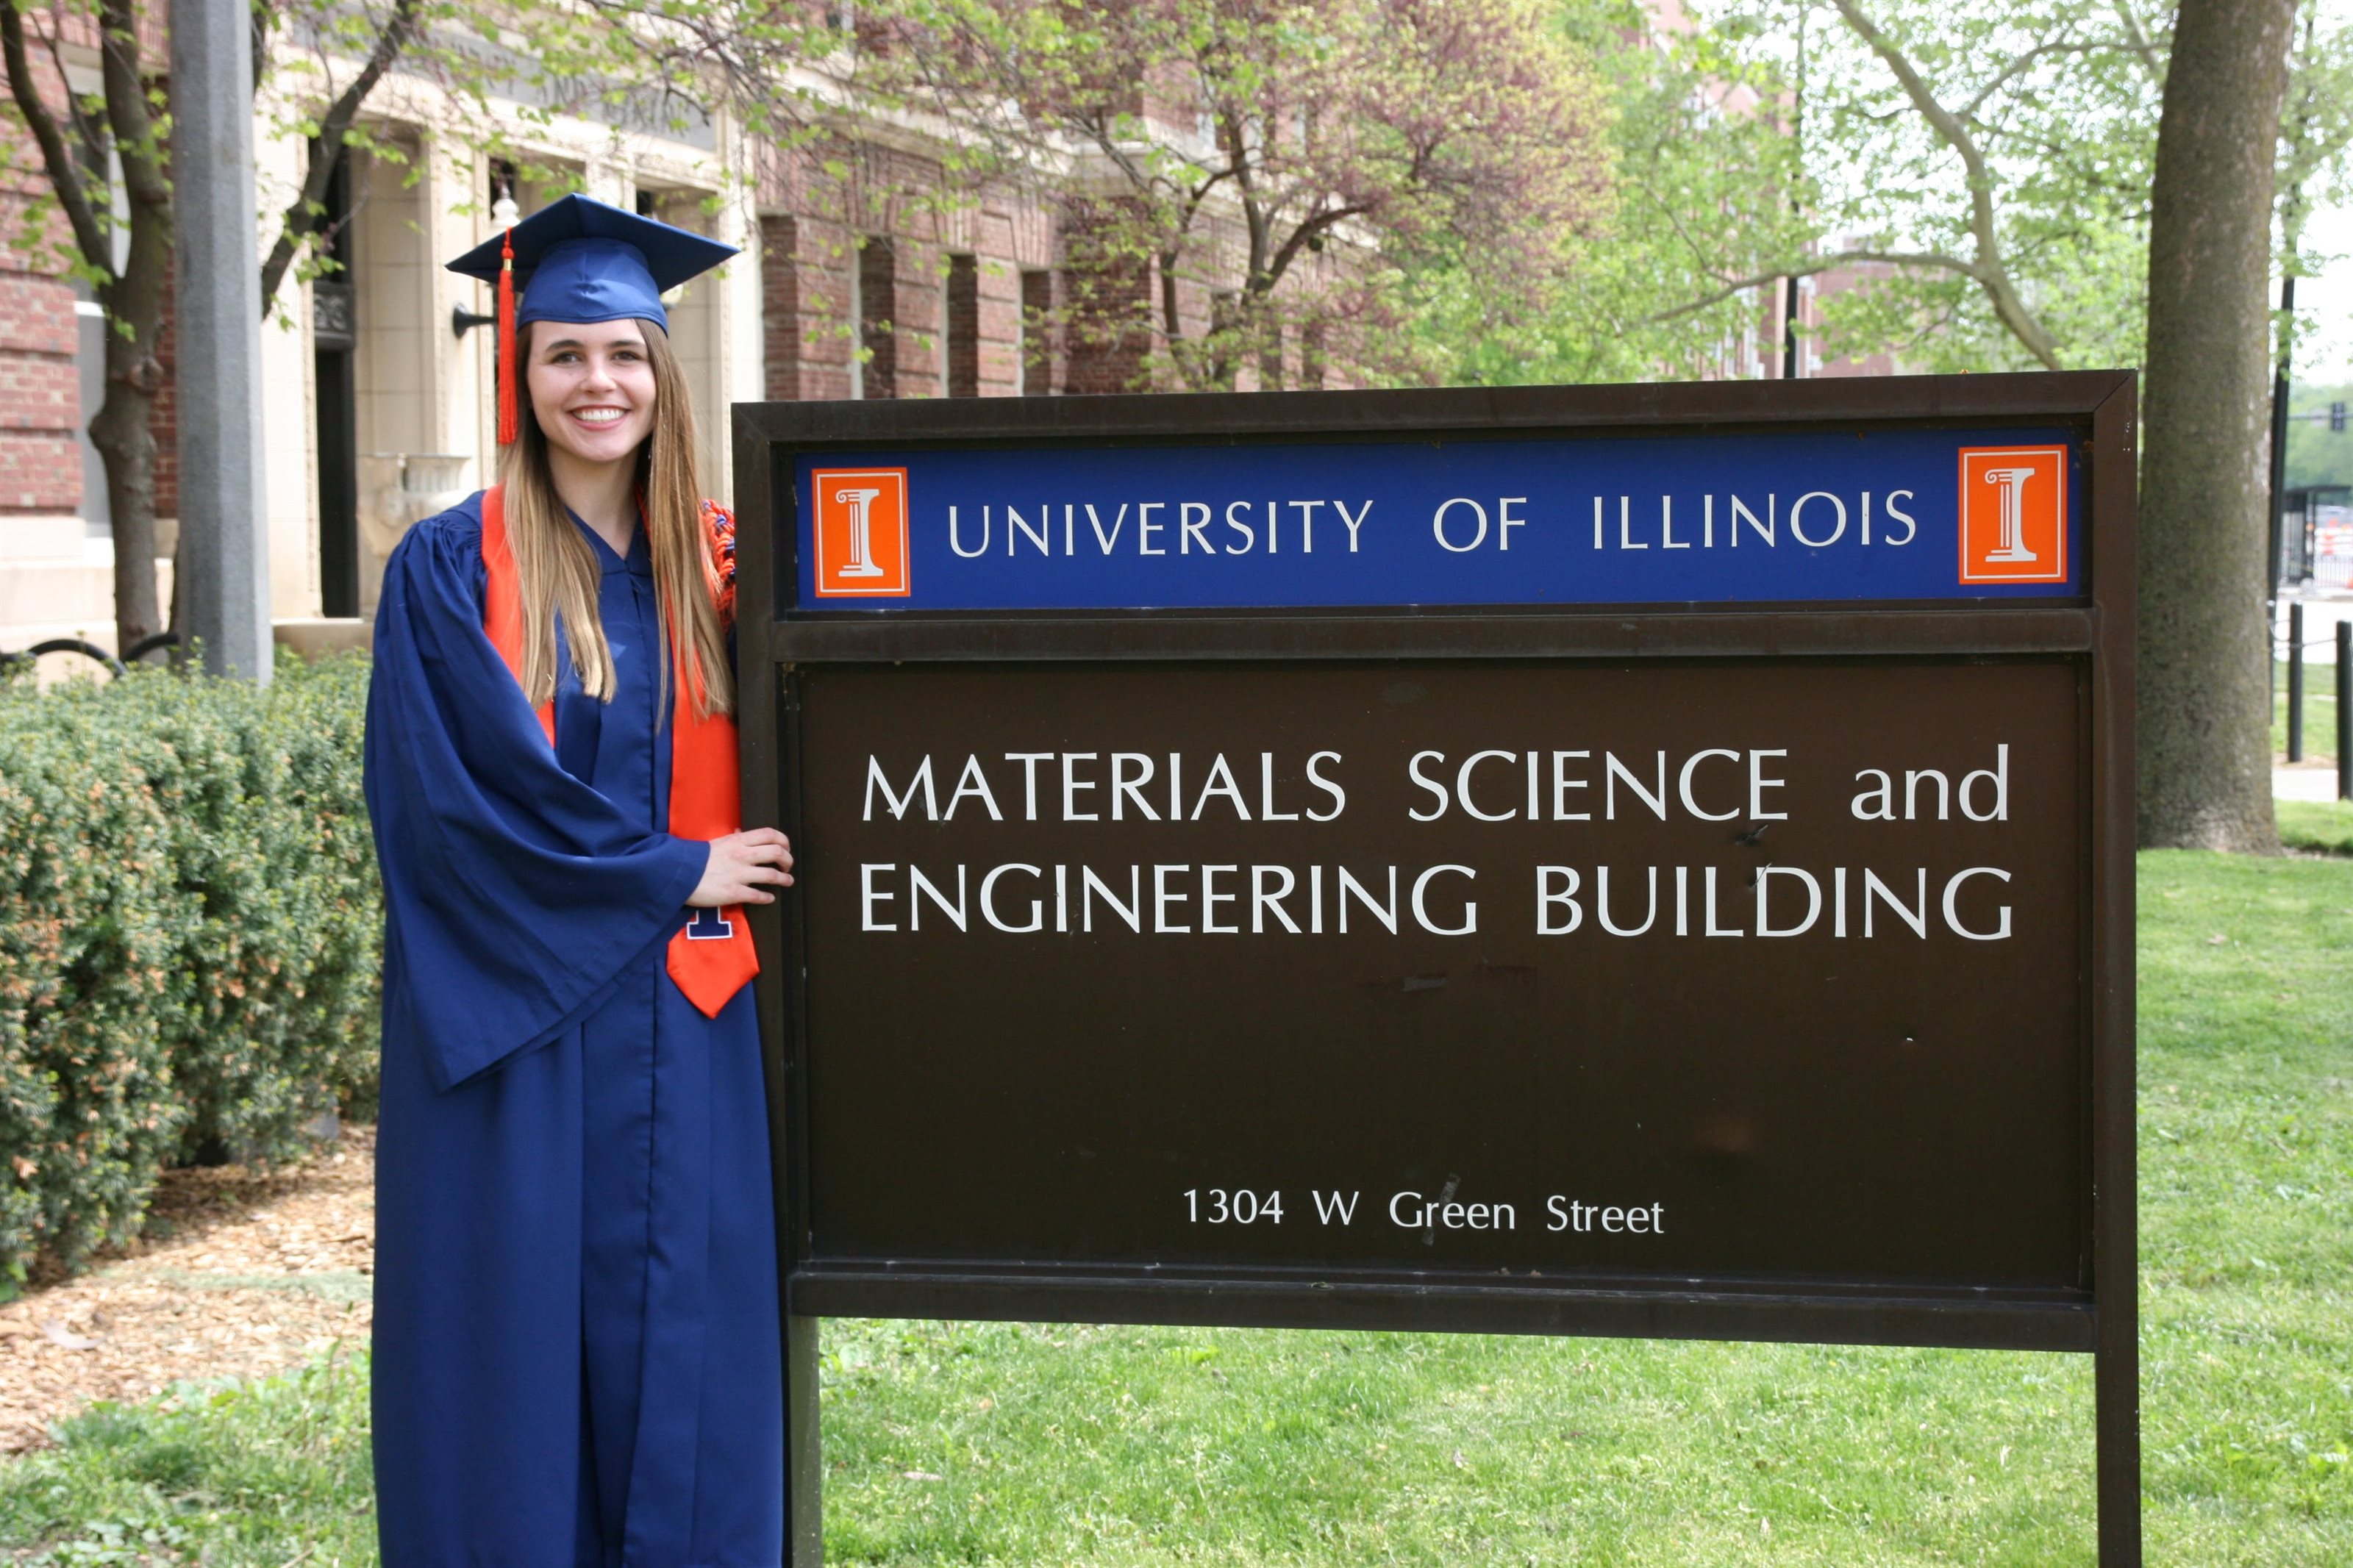 Lauren (Smith) Fey, an '18 MatSE alumnus and now computational researcher and doctoral student at the University of California, Santa Barbara, is all smiles in her graduation regalia outside the Materials Science and Engineering Building on Green Street in Urbana, Ill.